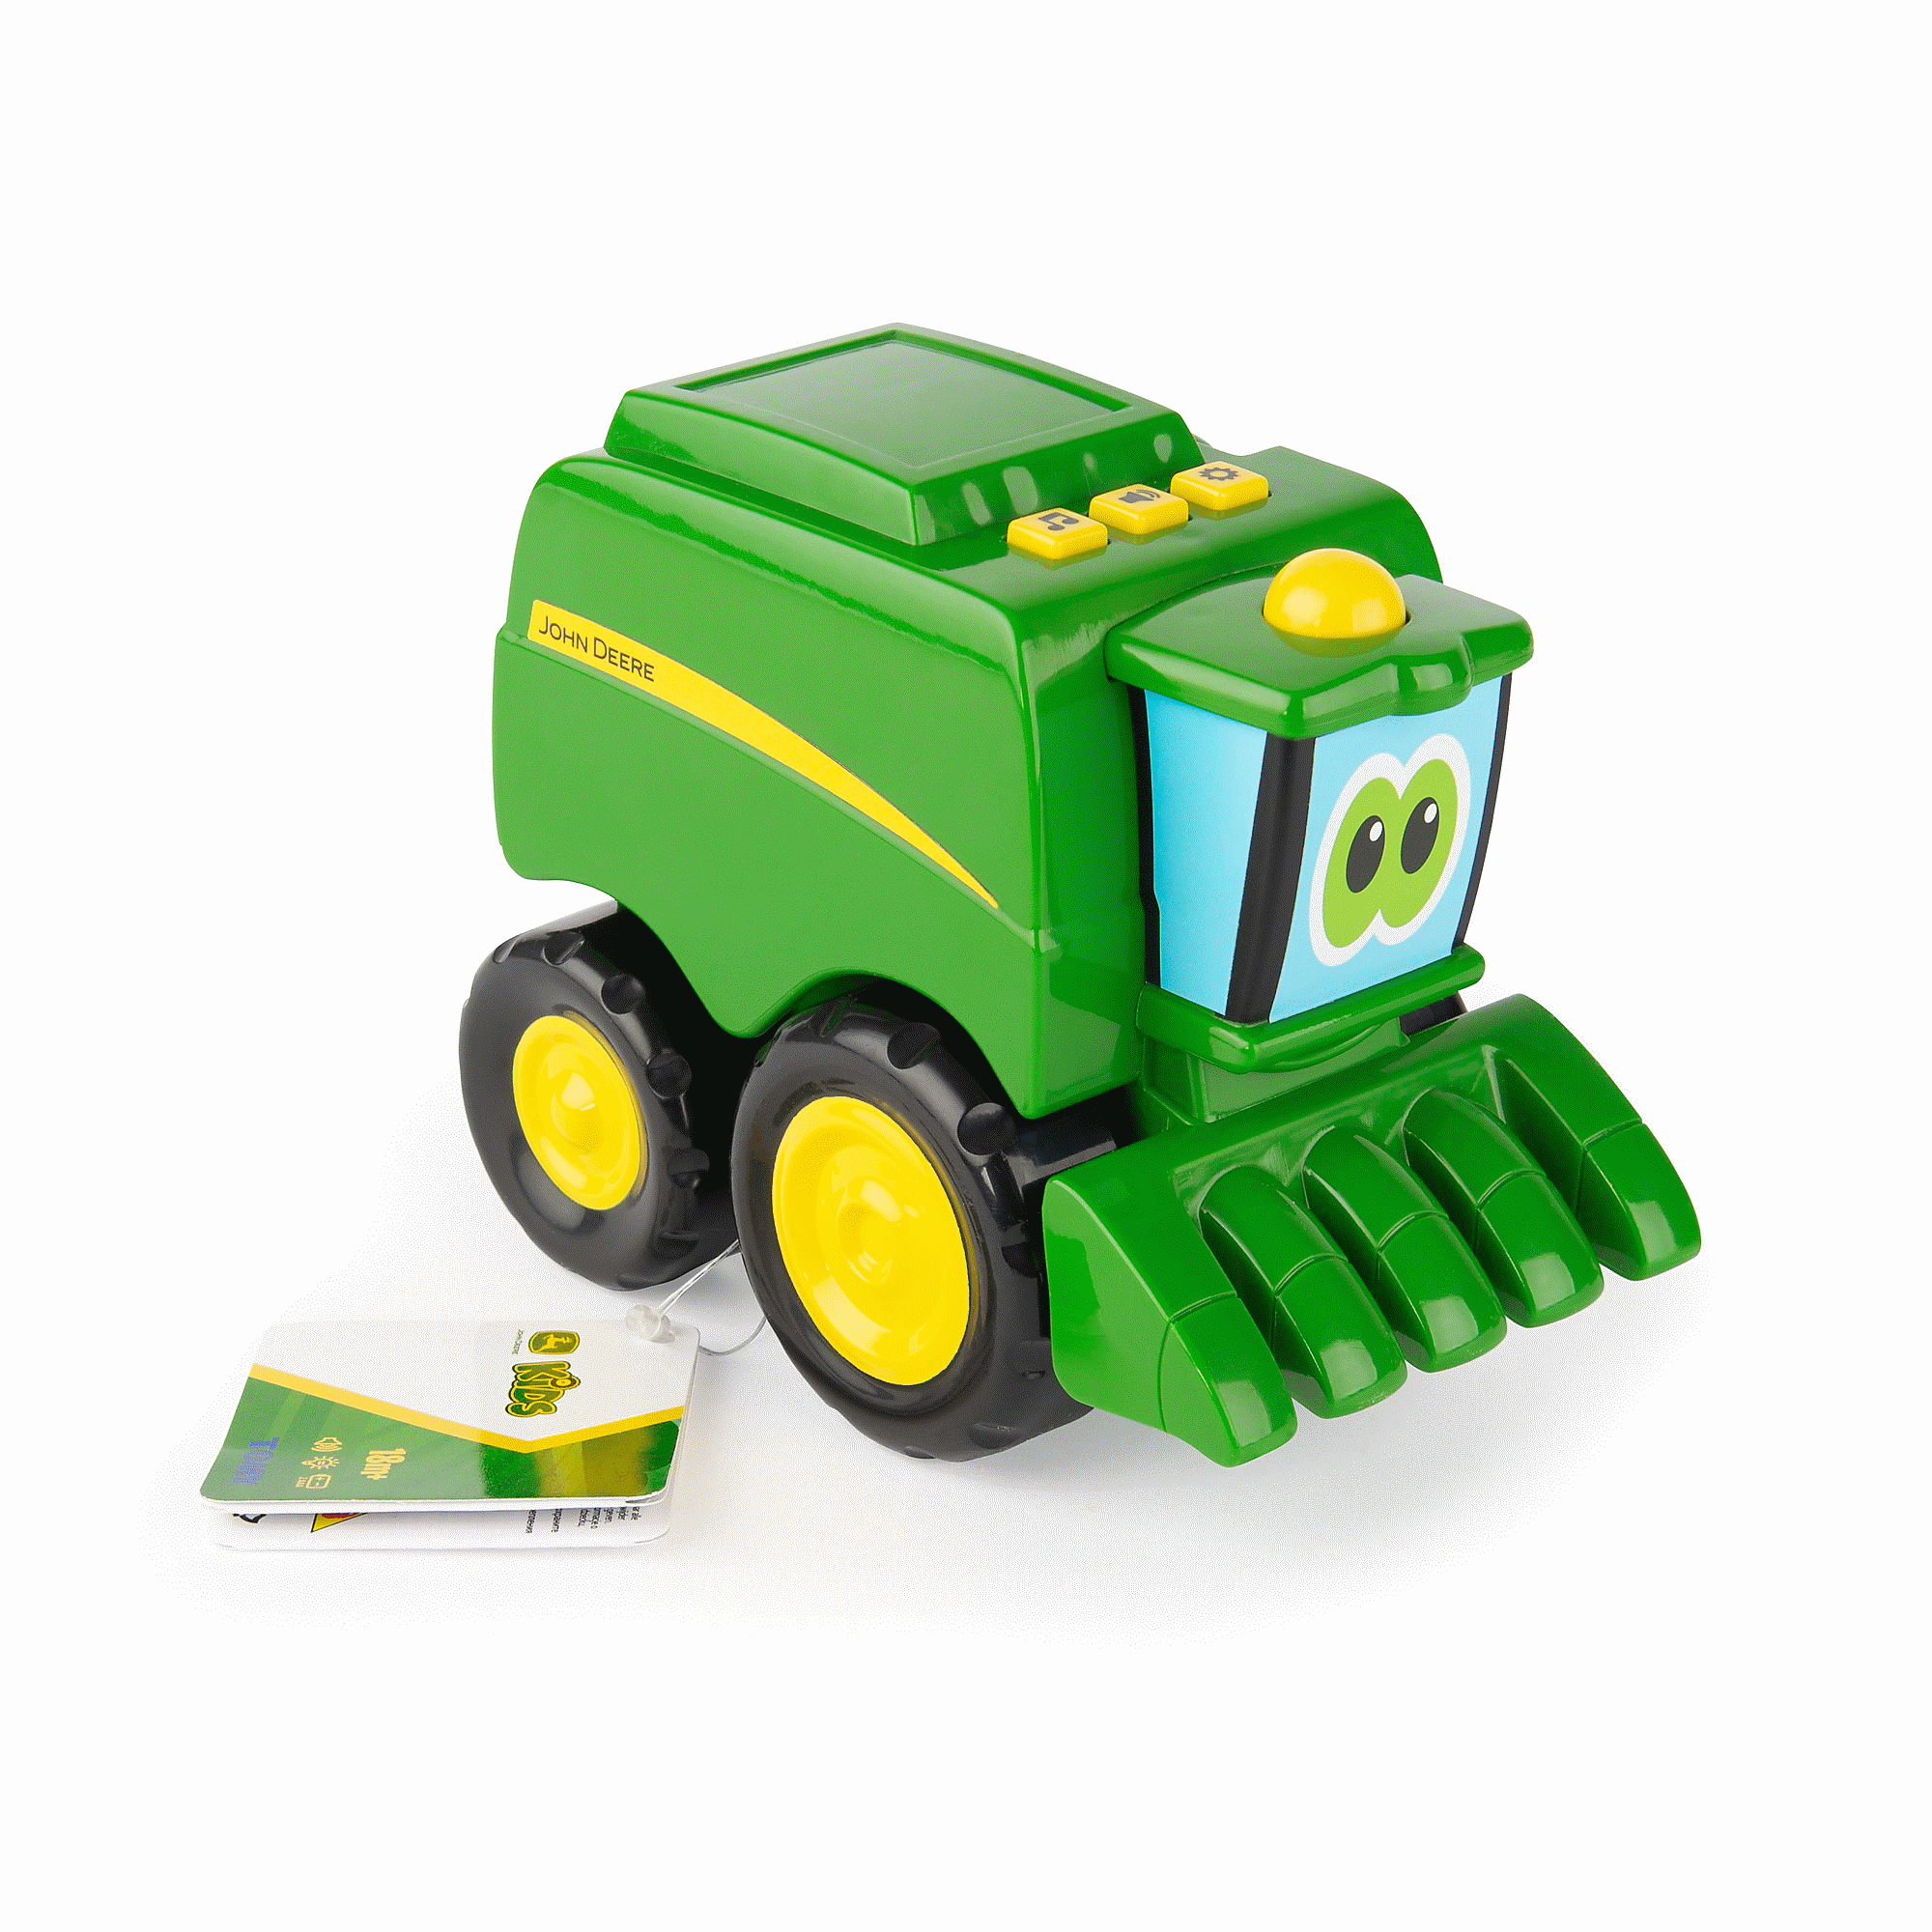 TOMY-Johnny or Corey Lights and Sounds Vehicle-37910A-Legacy Toys